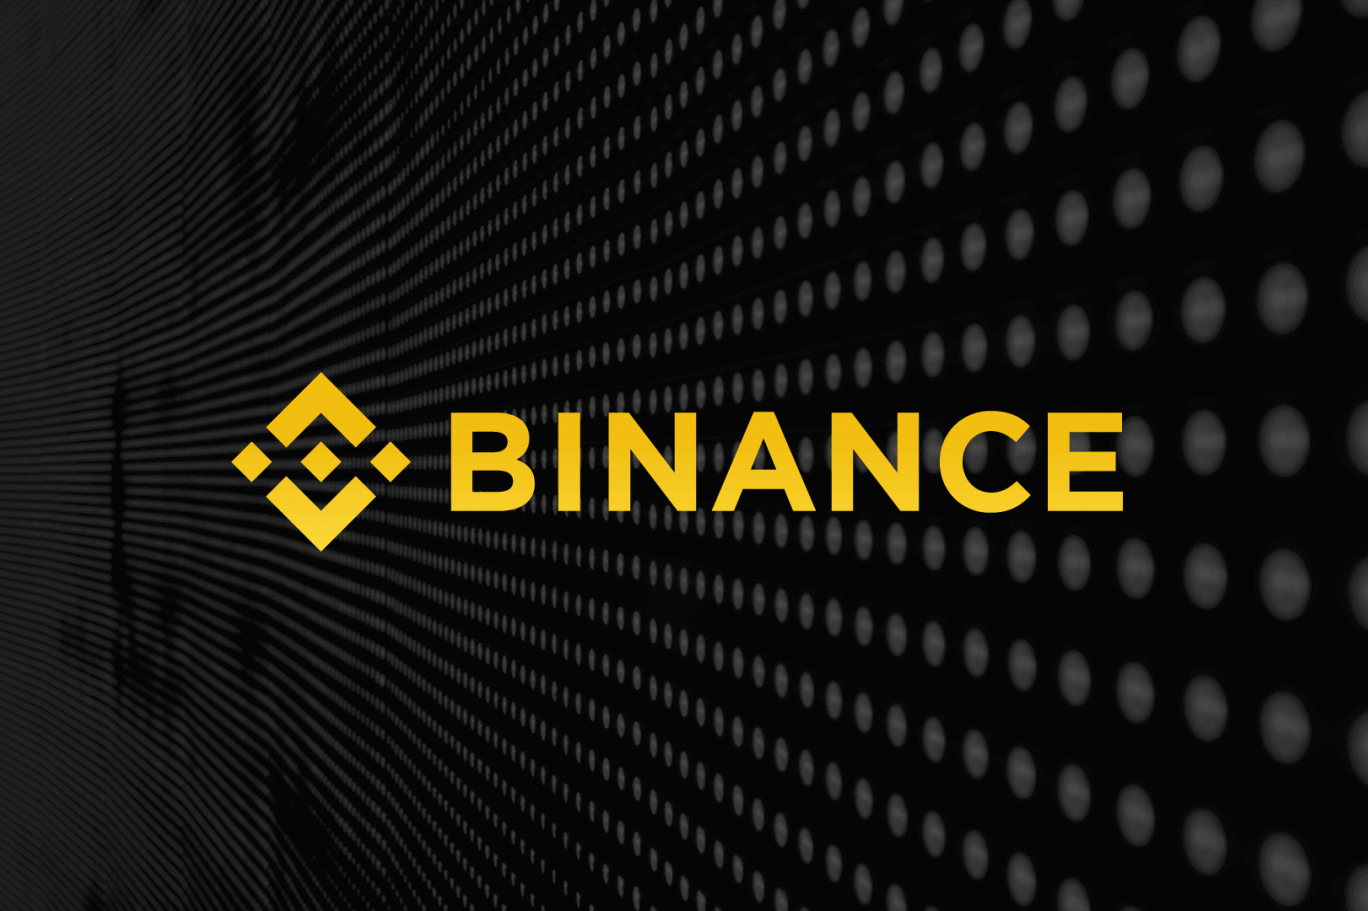 Binance Launches Stpt And Waxp Contracts With 50X Leverage!